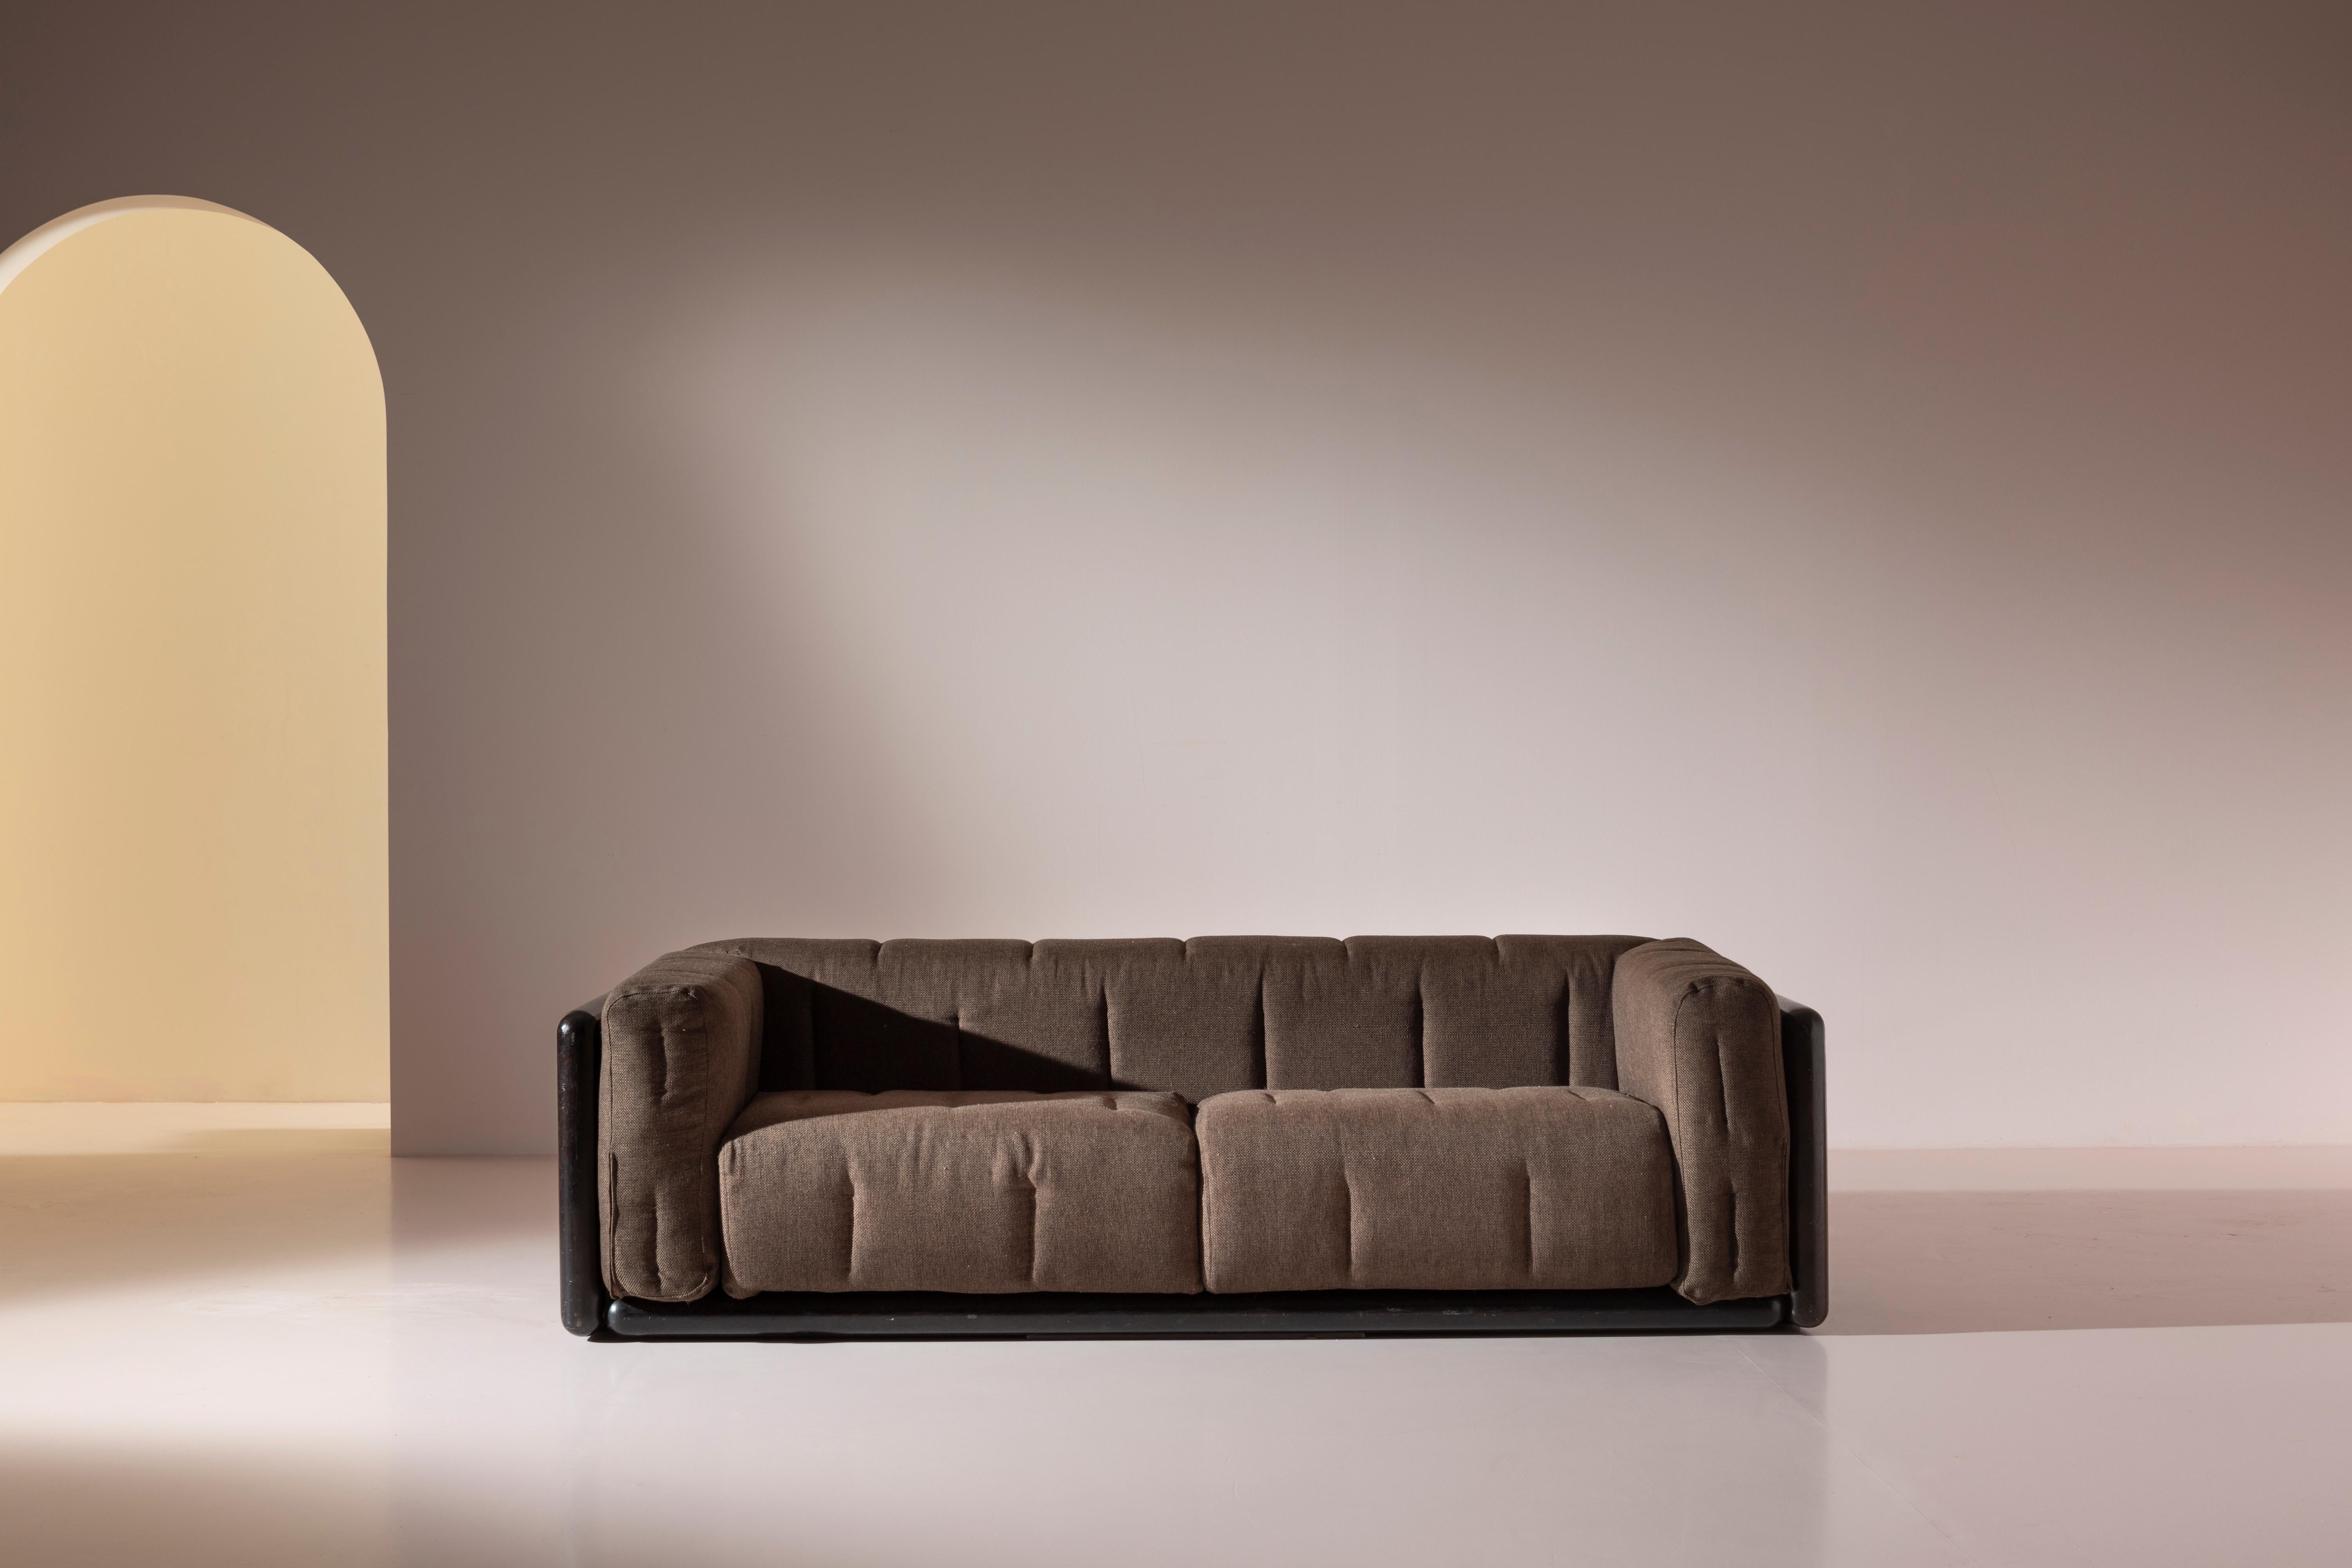 The three-seater wooden and fabric sofa, model Cornaro, was designed by Carlo Scarpa for Simon Gavina in 1973.

This sofa boasts a spacious and comfortable seat comprised of a series of padded cushions set within a varnished wooden frame. Its